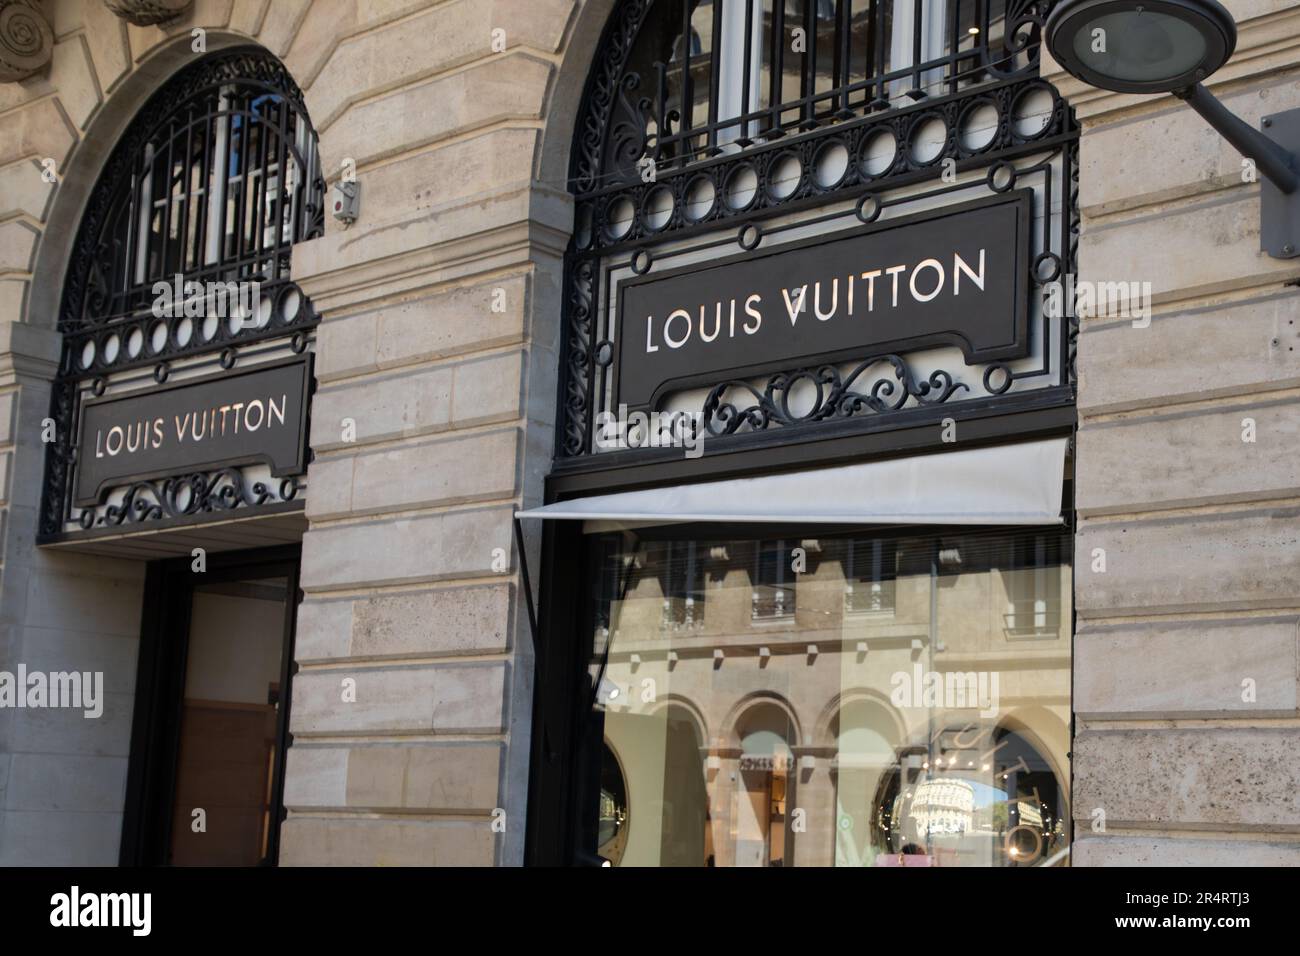 Munich, Germany : Louis Vuitton logo. Louis Vuitton Malletier is a french  fashion house founded in 1854, today belonging to LVMH group Stock Photo -  Alamy